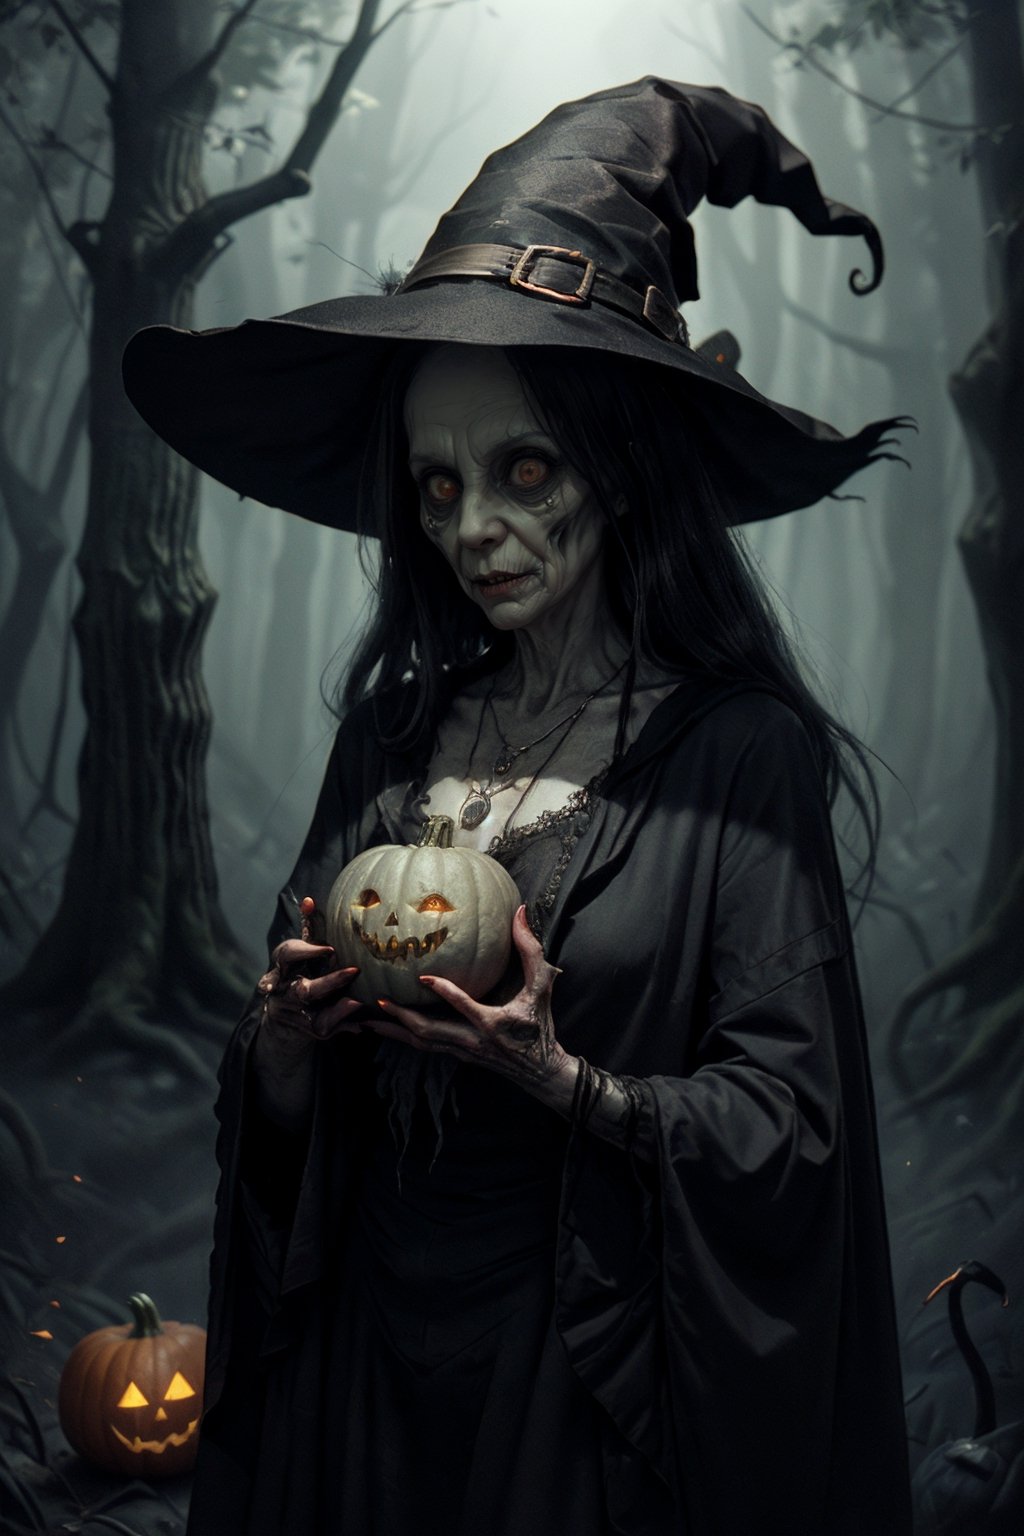 Best picture quality, n3n3k, looking at viewer, hat, witch hat, witch, black headwear, jewelry, necklace,rim light,,mysterious forest, anthropomorphic tree spirit, holding a pumpkin lantern, following a floating, cute little ghost, full of details,